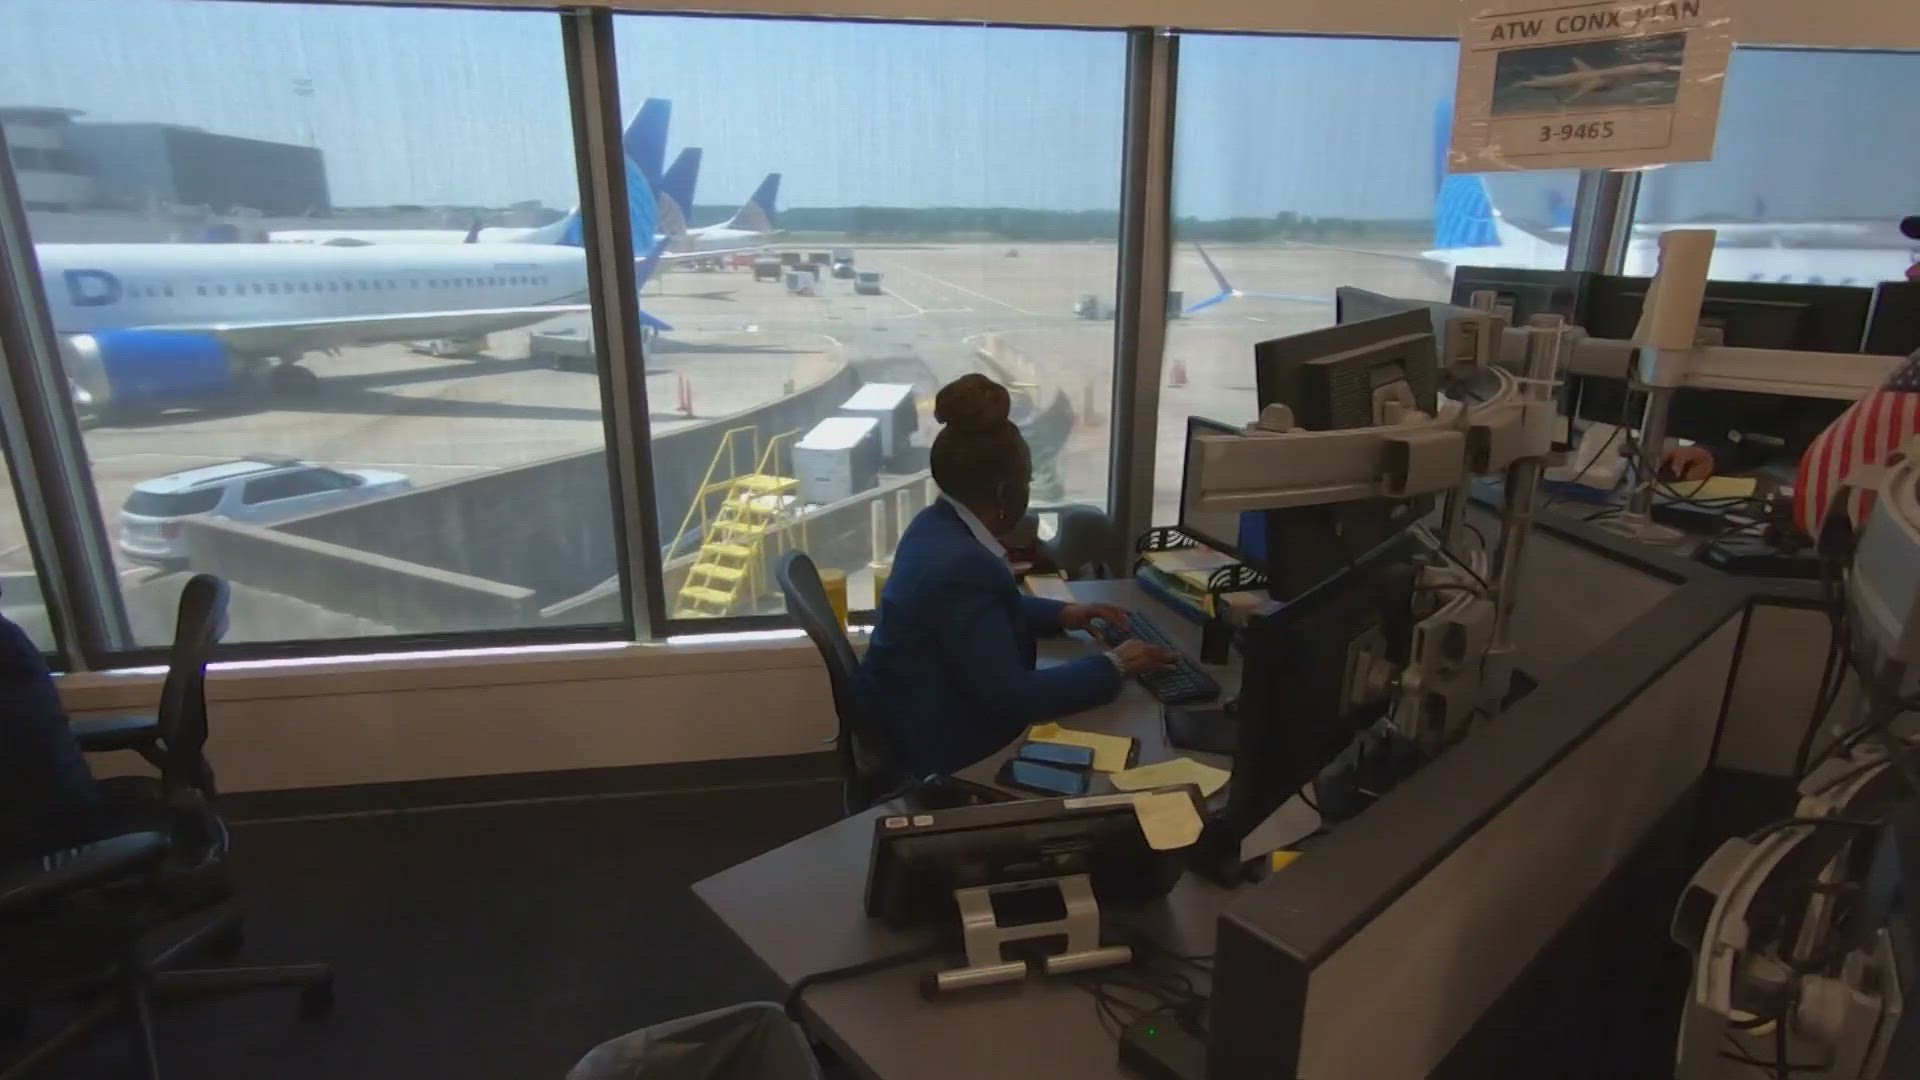 Jason Miles gives a behind-the-scenes look at how airlines manage their flights and gates.